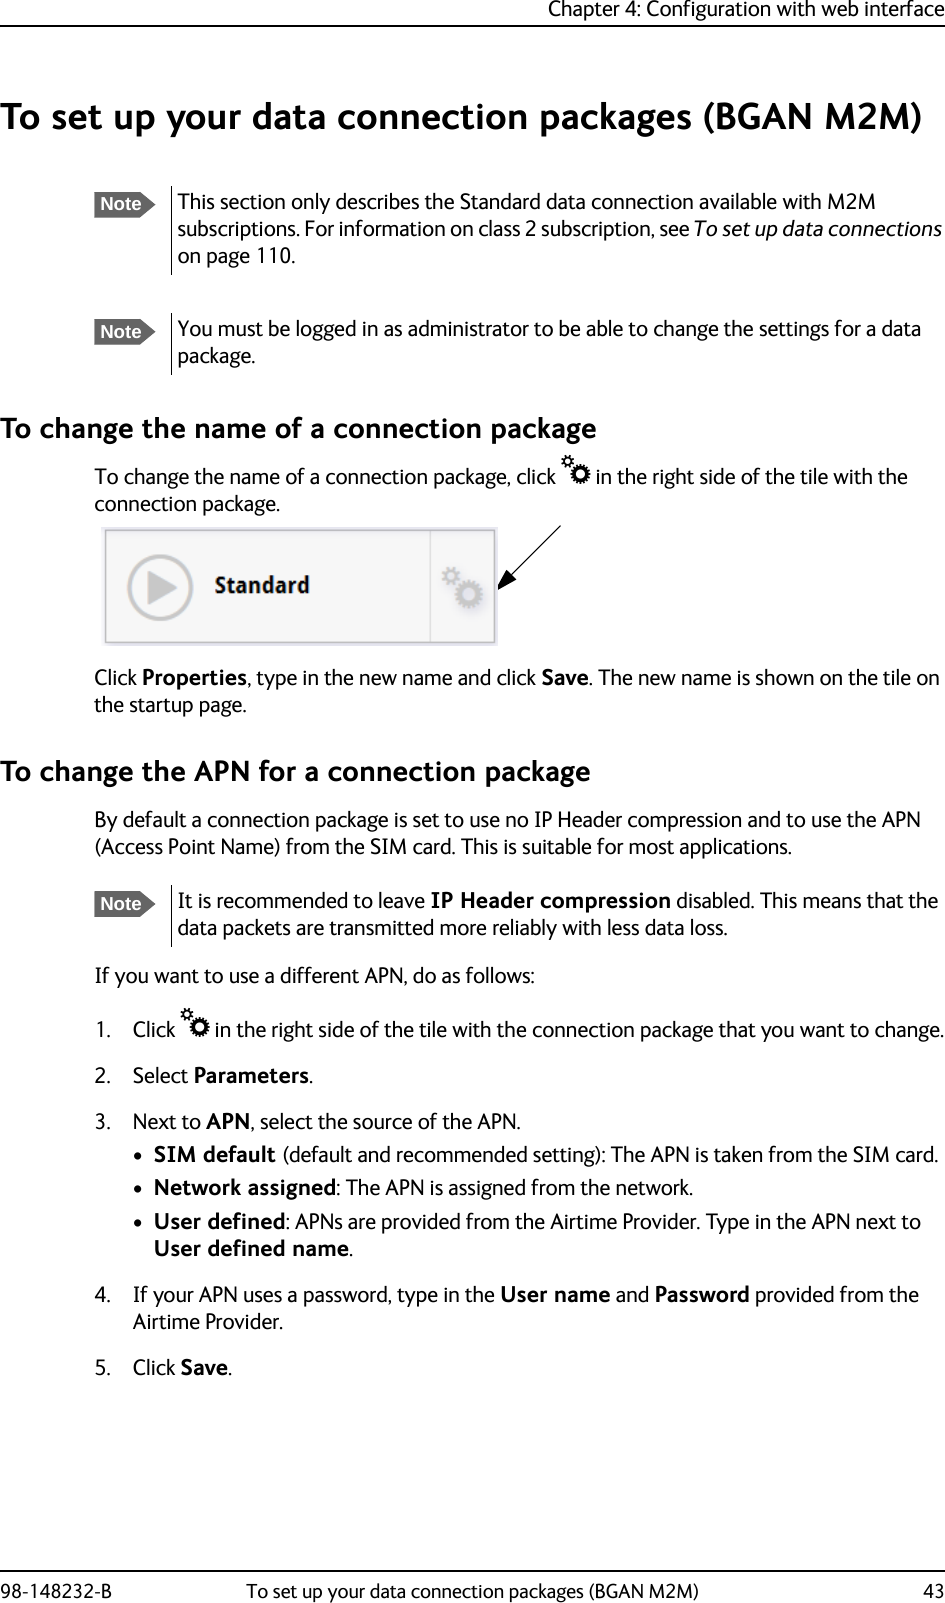 Chapter 4: Configuration with web interface98-148232-B To set up your data connection packages (BGAN M2M) 43To set up your data connection packages (BGAN M2M)To change the name of a connection packageTo change the name of a connection package, click  in the right side of the tile with the connection package.Click Properties, type in the new name and click Save. The new name is shown on the tile on the startup page.To change the APN for a connection packageBy default a connection package is set to use no IP Header compression and to use the APN (Access Point Name) from the SIM card. This is suitable for most applications.If you want to use a different APN, do as follows:1. Click  in the right side of the tile with the connection package that you want to change.2. Select Parameters.3. Next to APN, select the source of the APN.•SIM default (default and recommended setting): The APN is taken from the SIM card.•Network assigned: The APN is assigned from the network.•User defined: APNs are provided from the Airtime Provider. Type in the APN next to User defined name.4. If your APN uses a password, type in the User name and Password provided from the Airtime Provider.5. Click Save.NoteThis section only describes the Standard data connection available with M2M subscriptions. For information on class 2 subscription, see To set up data connections on page 110.NoteYou must be logged in as administrator to be able to change the settings for a data package. NoteIt is recommended to leave IP Header compression disabled. This means that the data packets are transmitted more reliably with less data loss.